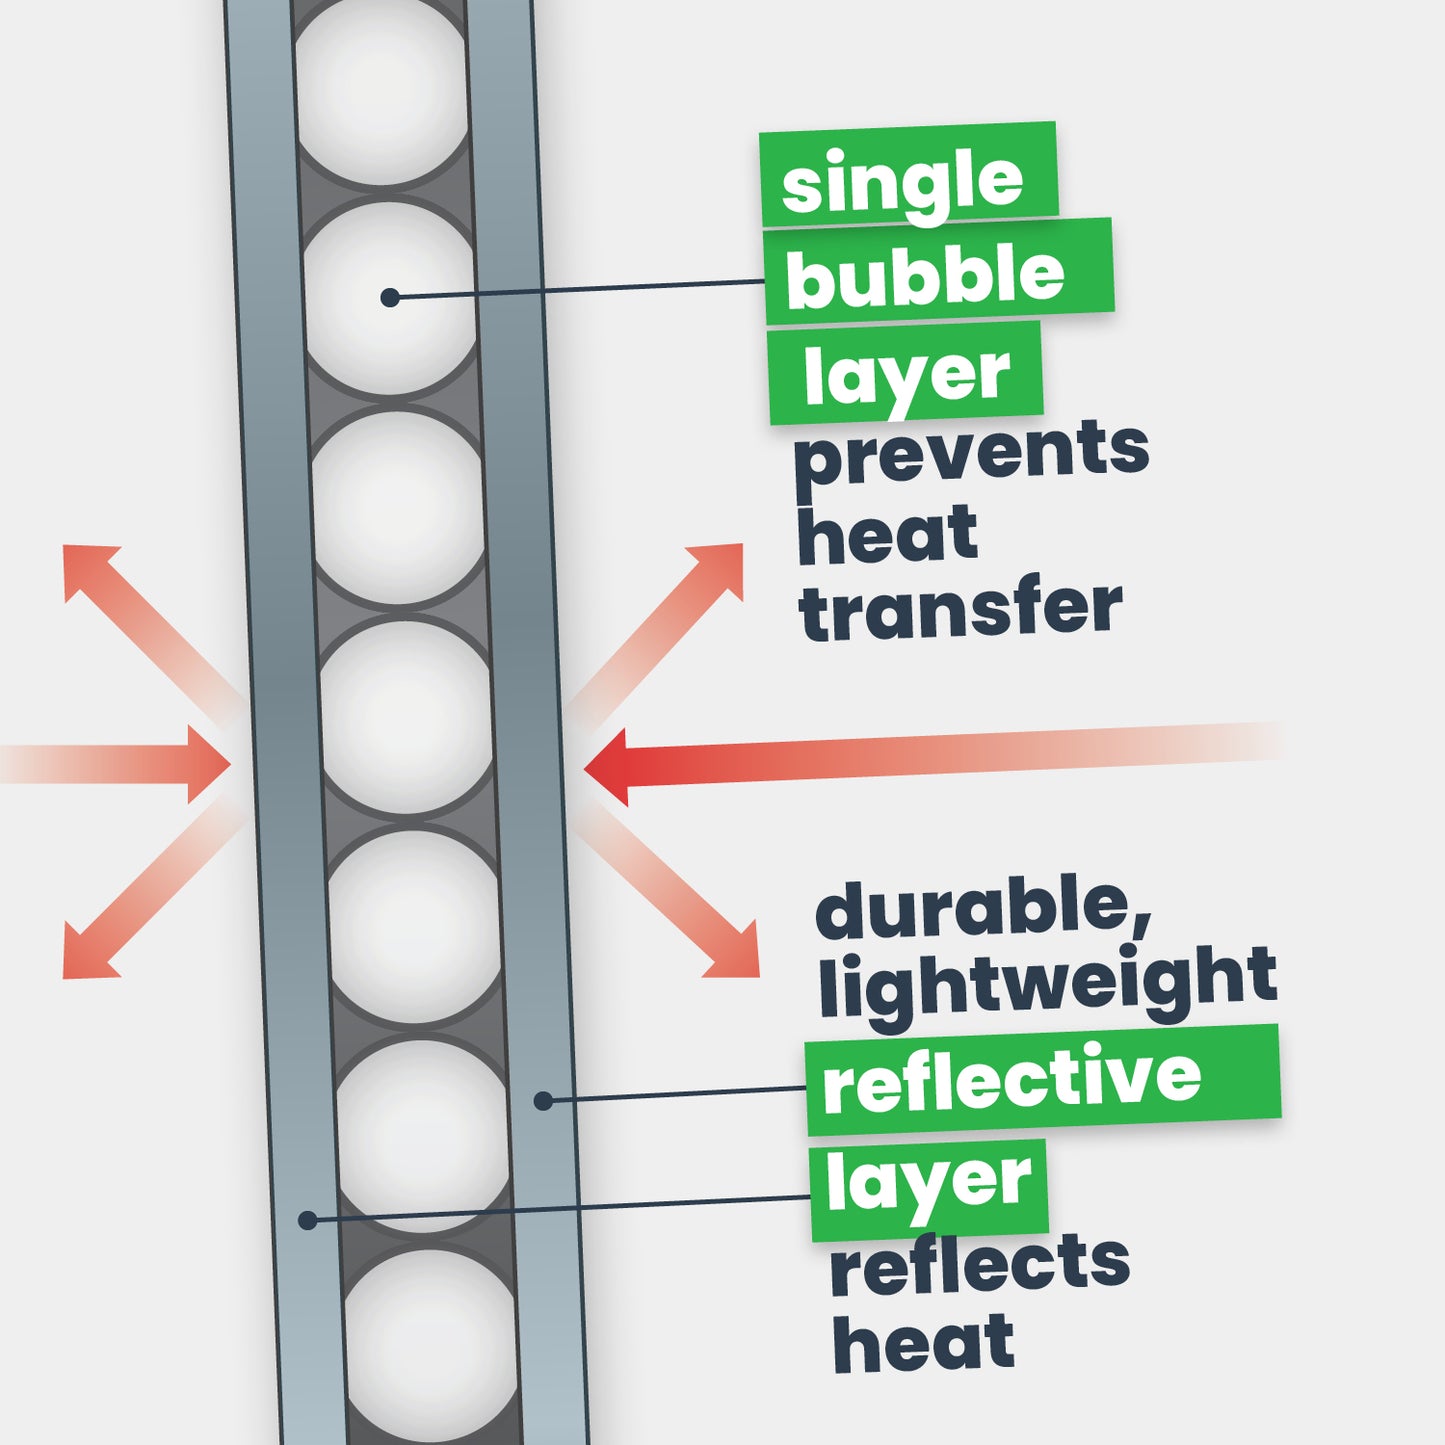 single bubble layer prevents heat transfer. durable, lightweight reflective layer reflects radiant heat